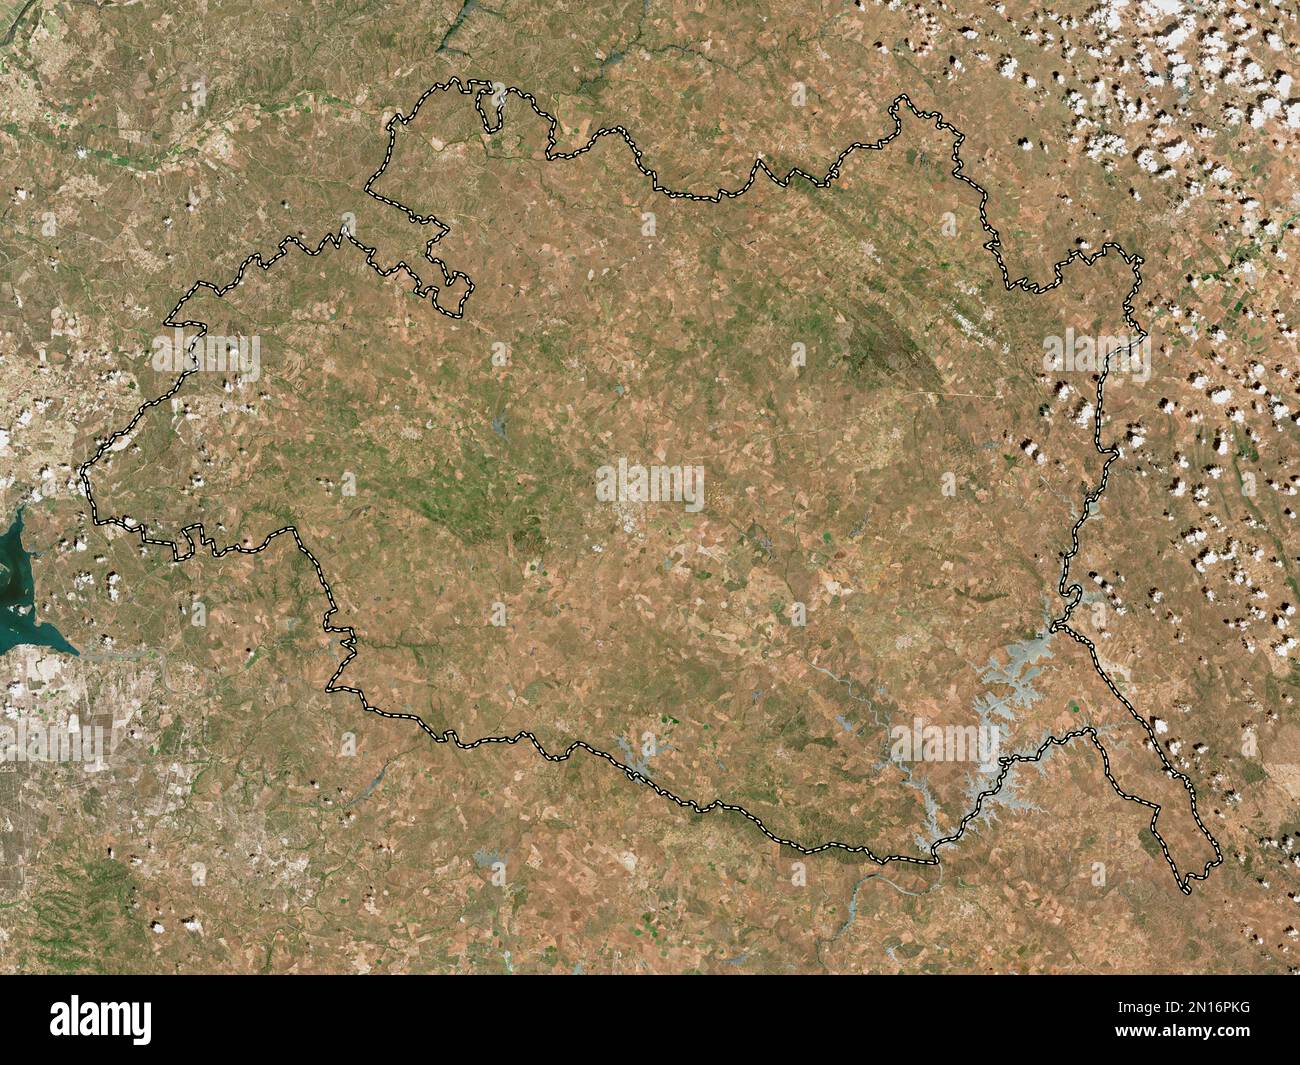 Evora, district of Portugal. Low resolution satellite map Stock Photo